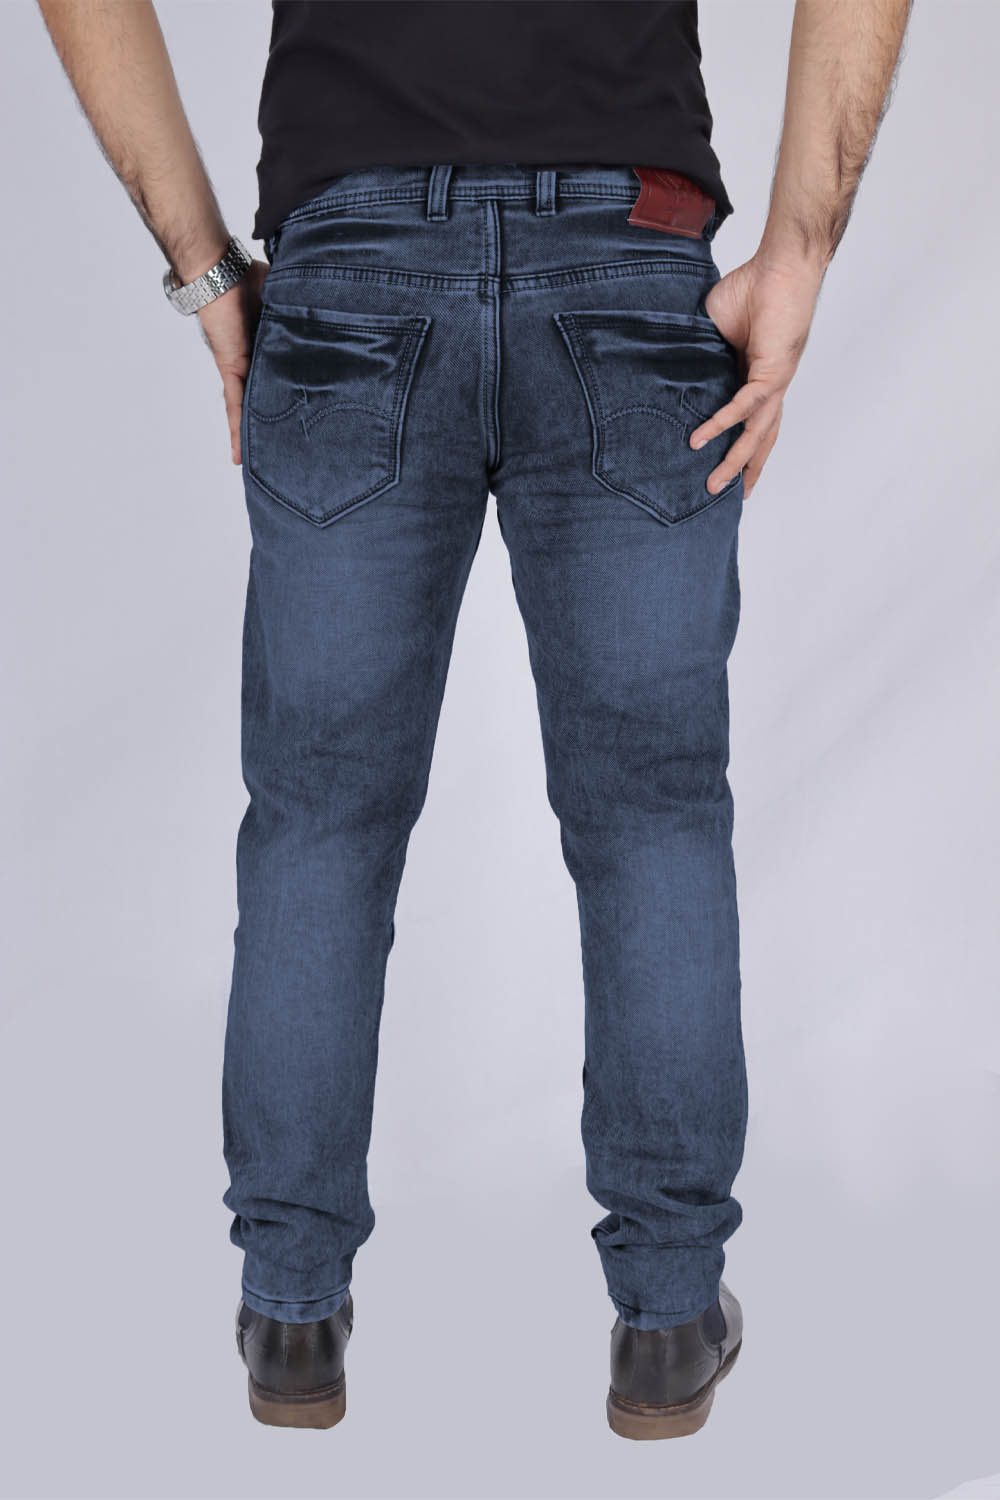 Diverse Men's Relaxed Fit Jeans